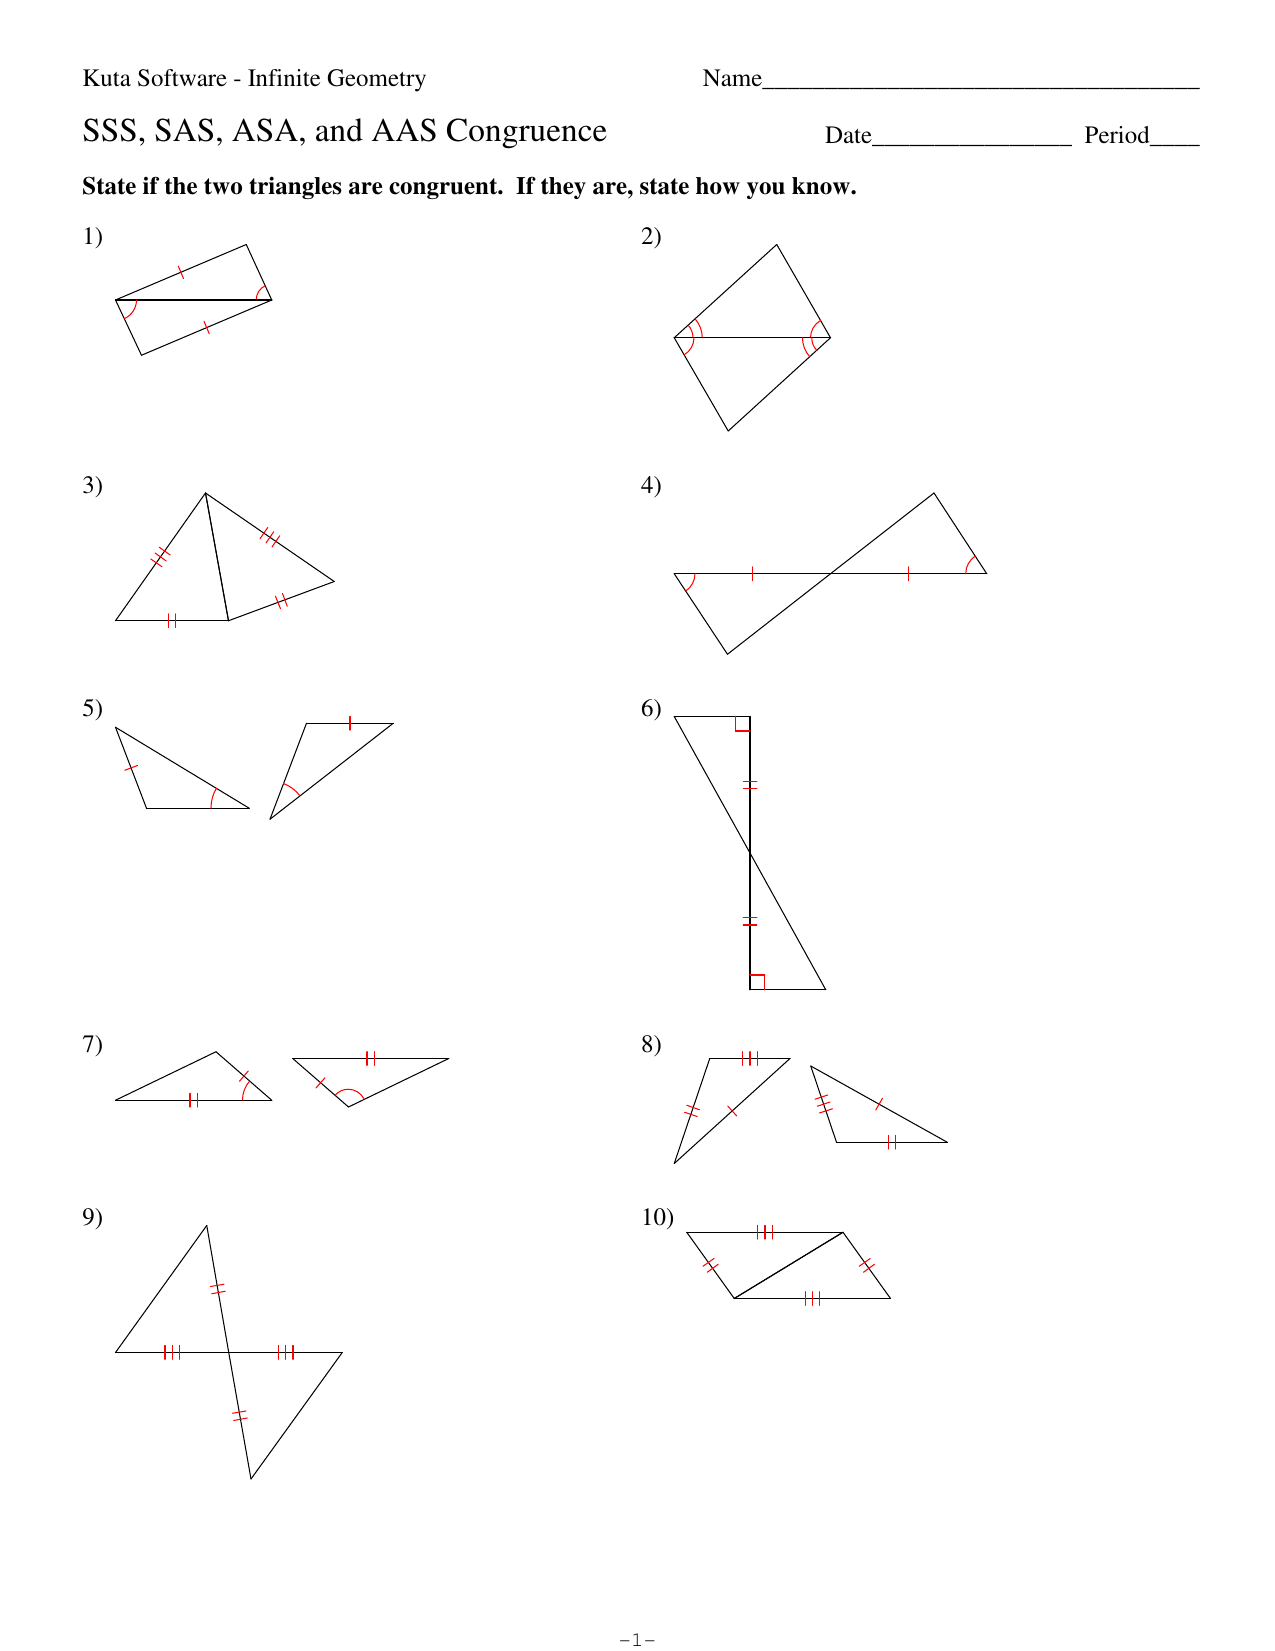 21-SSS SAS ASA and AAS Congruence With Triangle Congruence Practice Worksheet